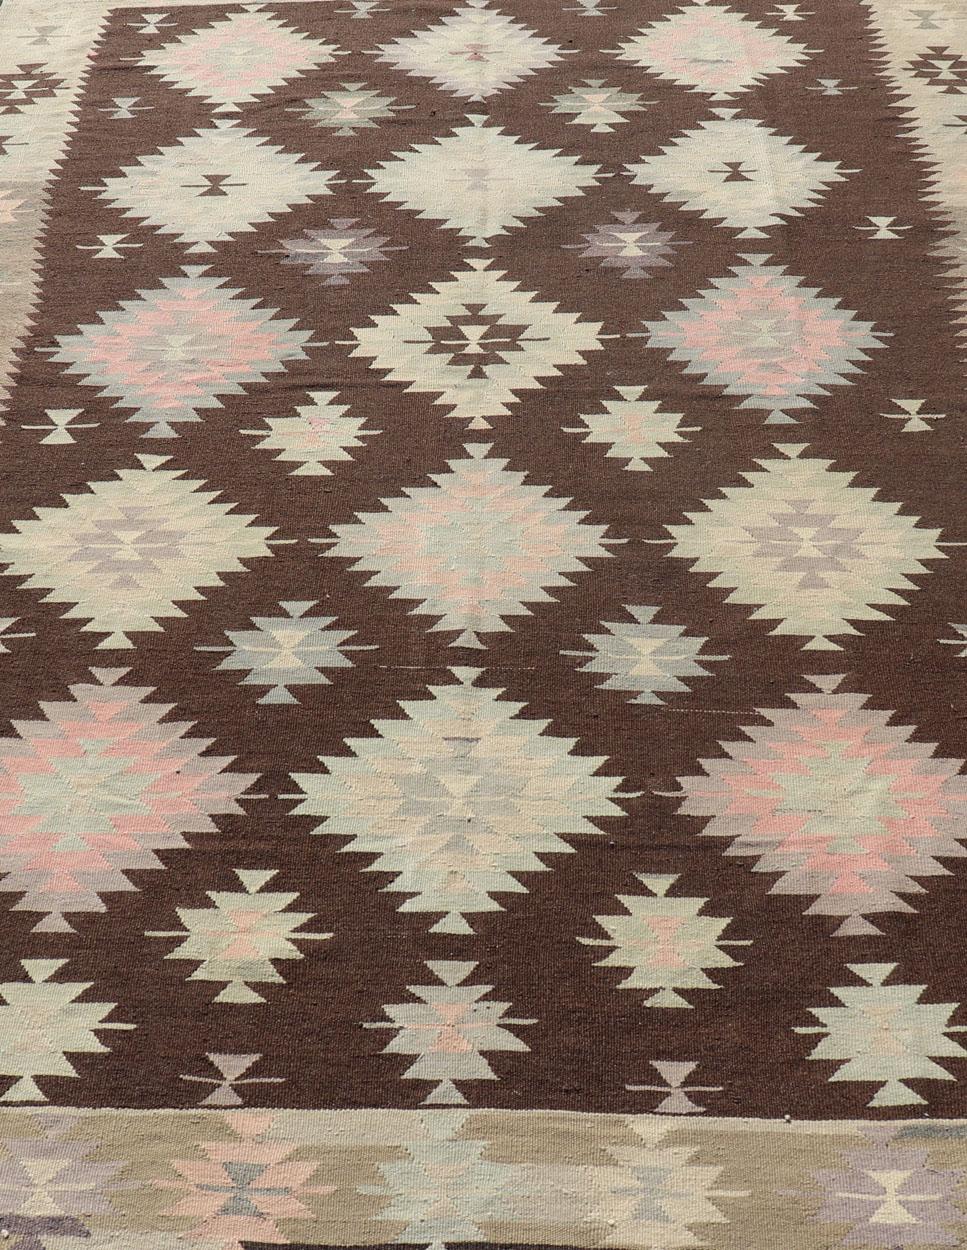 Tribal and Geometrics Turkish Kilim in Brown with Cream, Pink, Light Gray/Blue For Sale 2